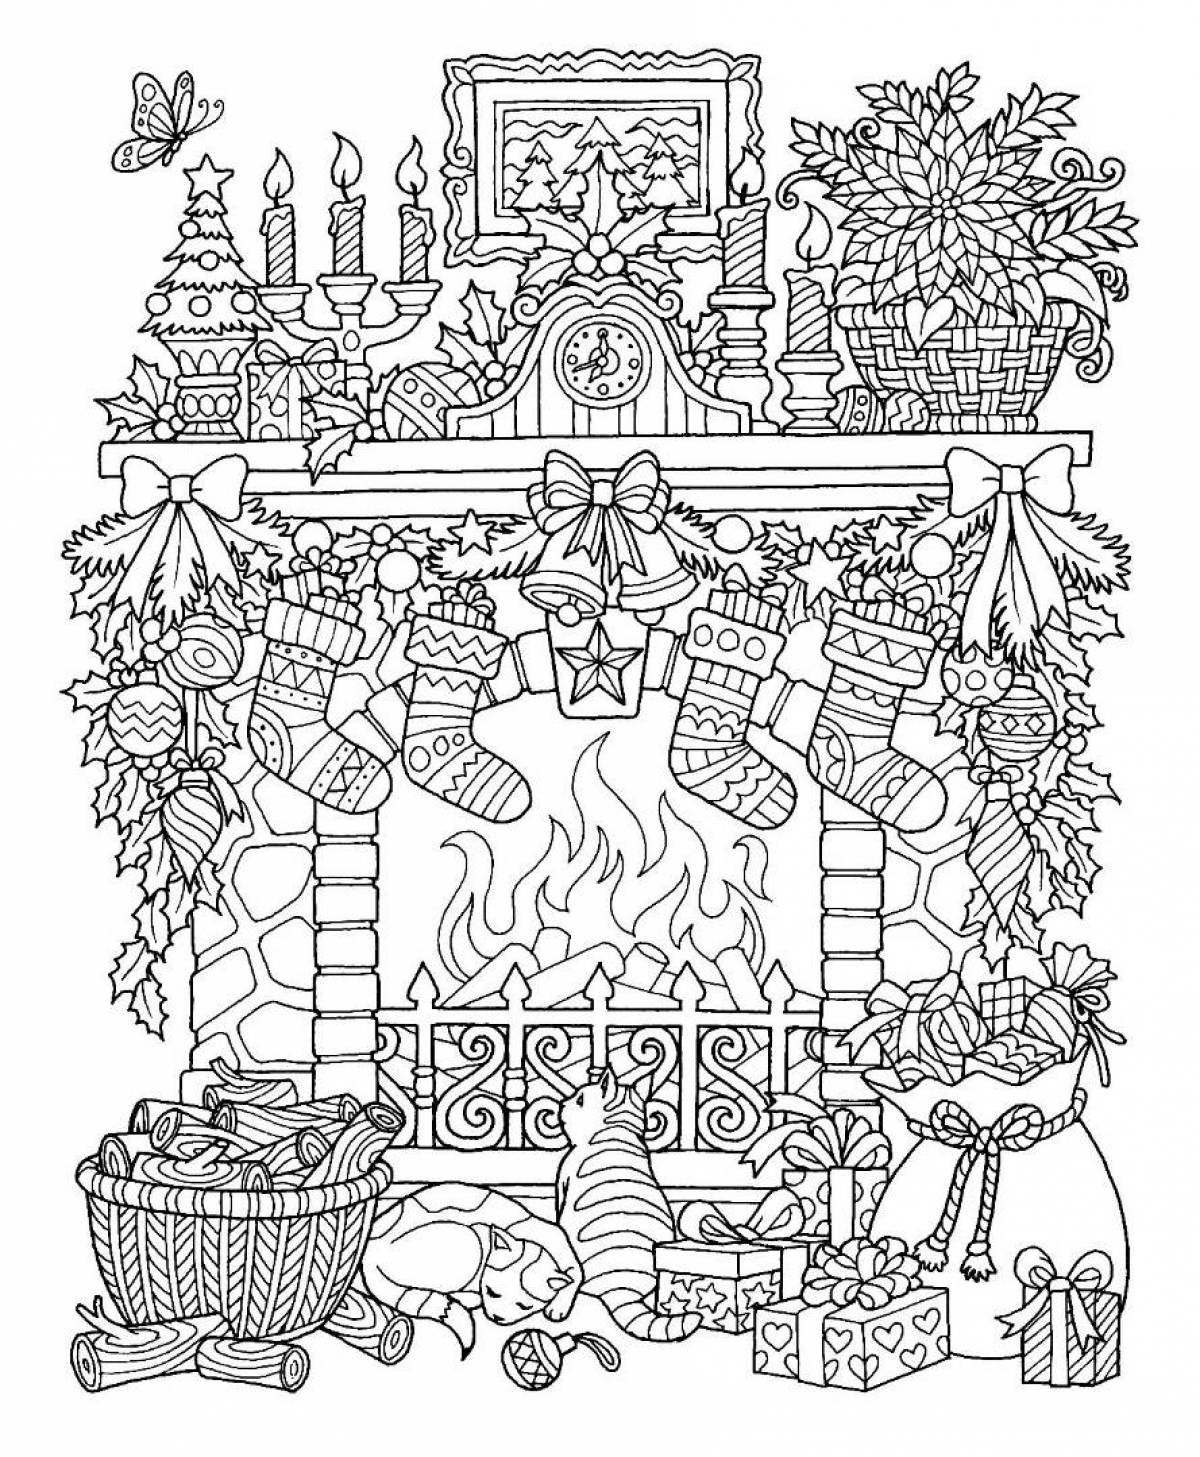 Colorful anti-stress Christmas coloring book